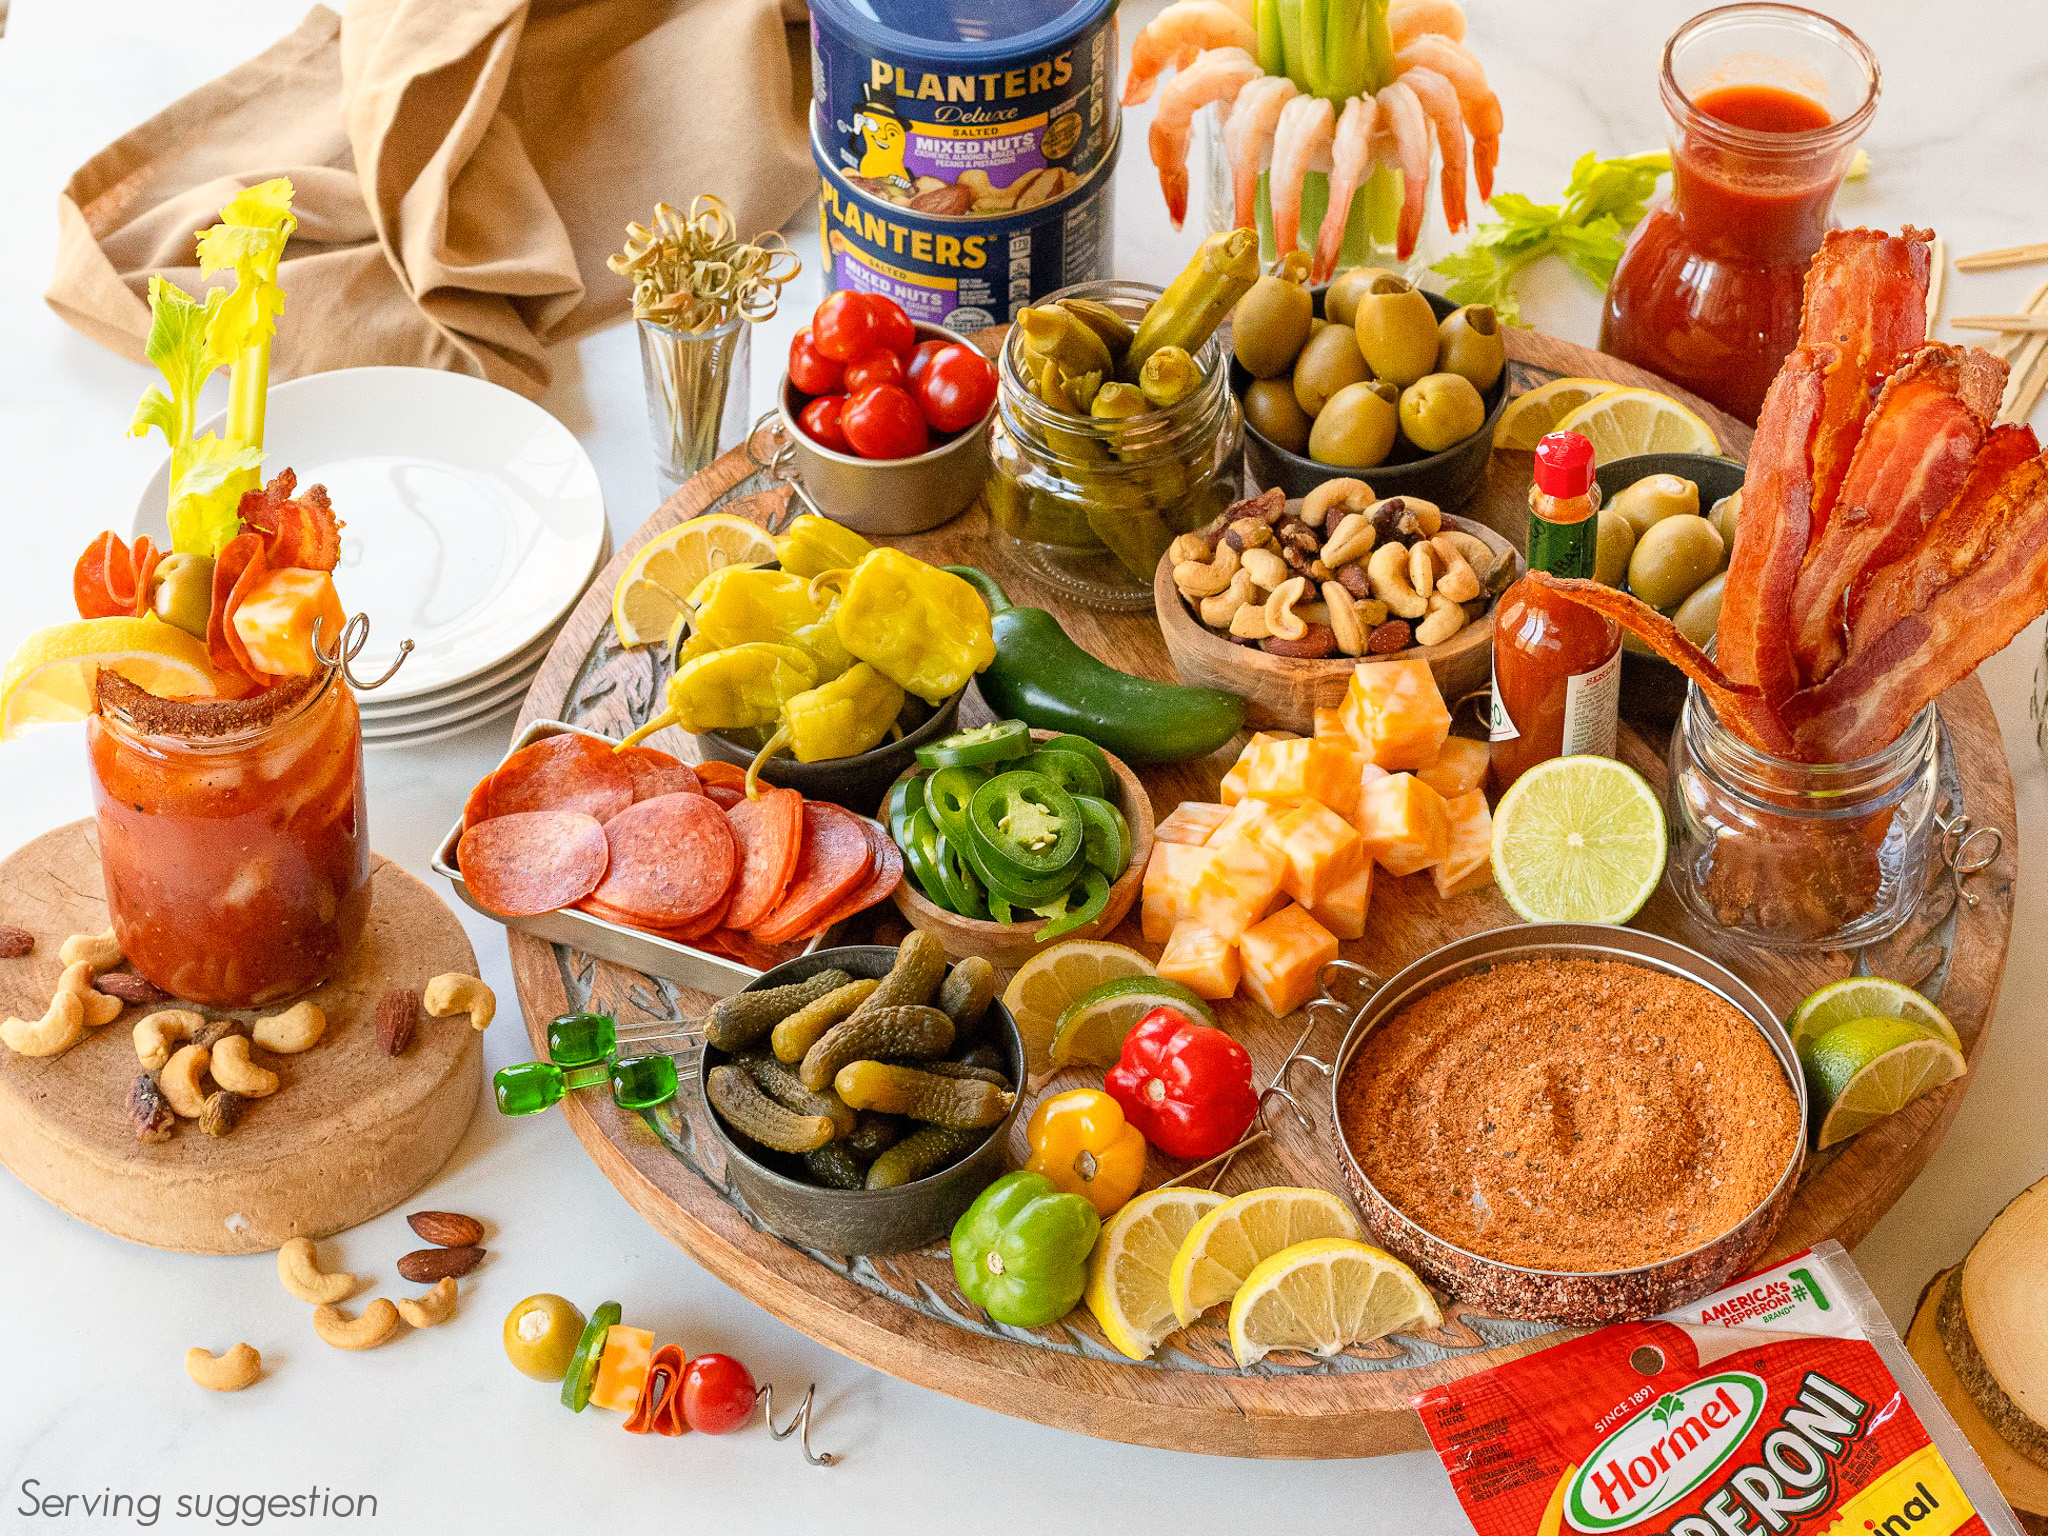 Serve Up A Delicious Bloody Mary Charcuterie Board At Your Next Gathering With The Help Of Hormel Foods Products